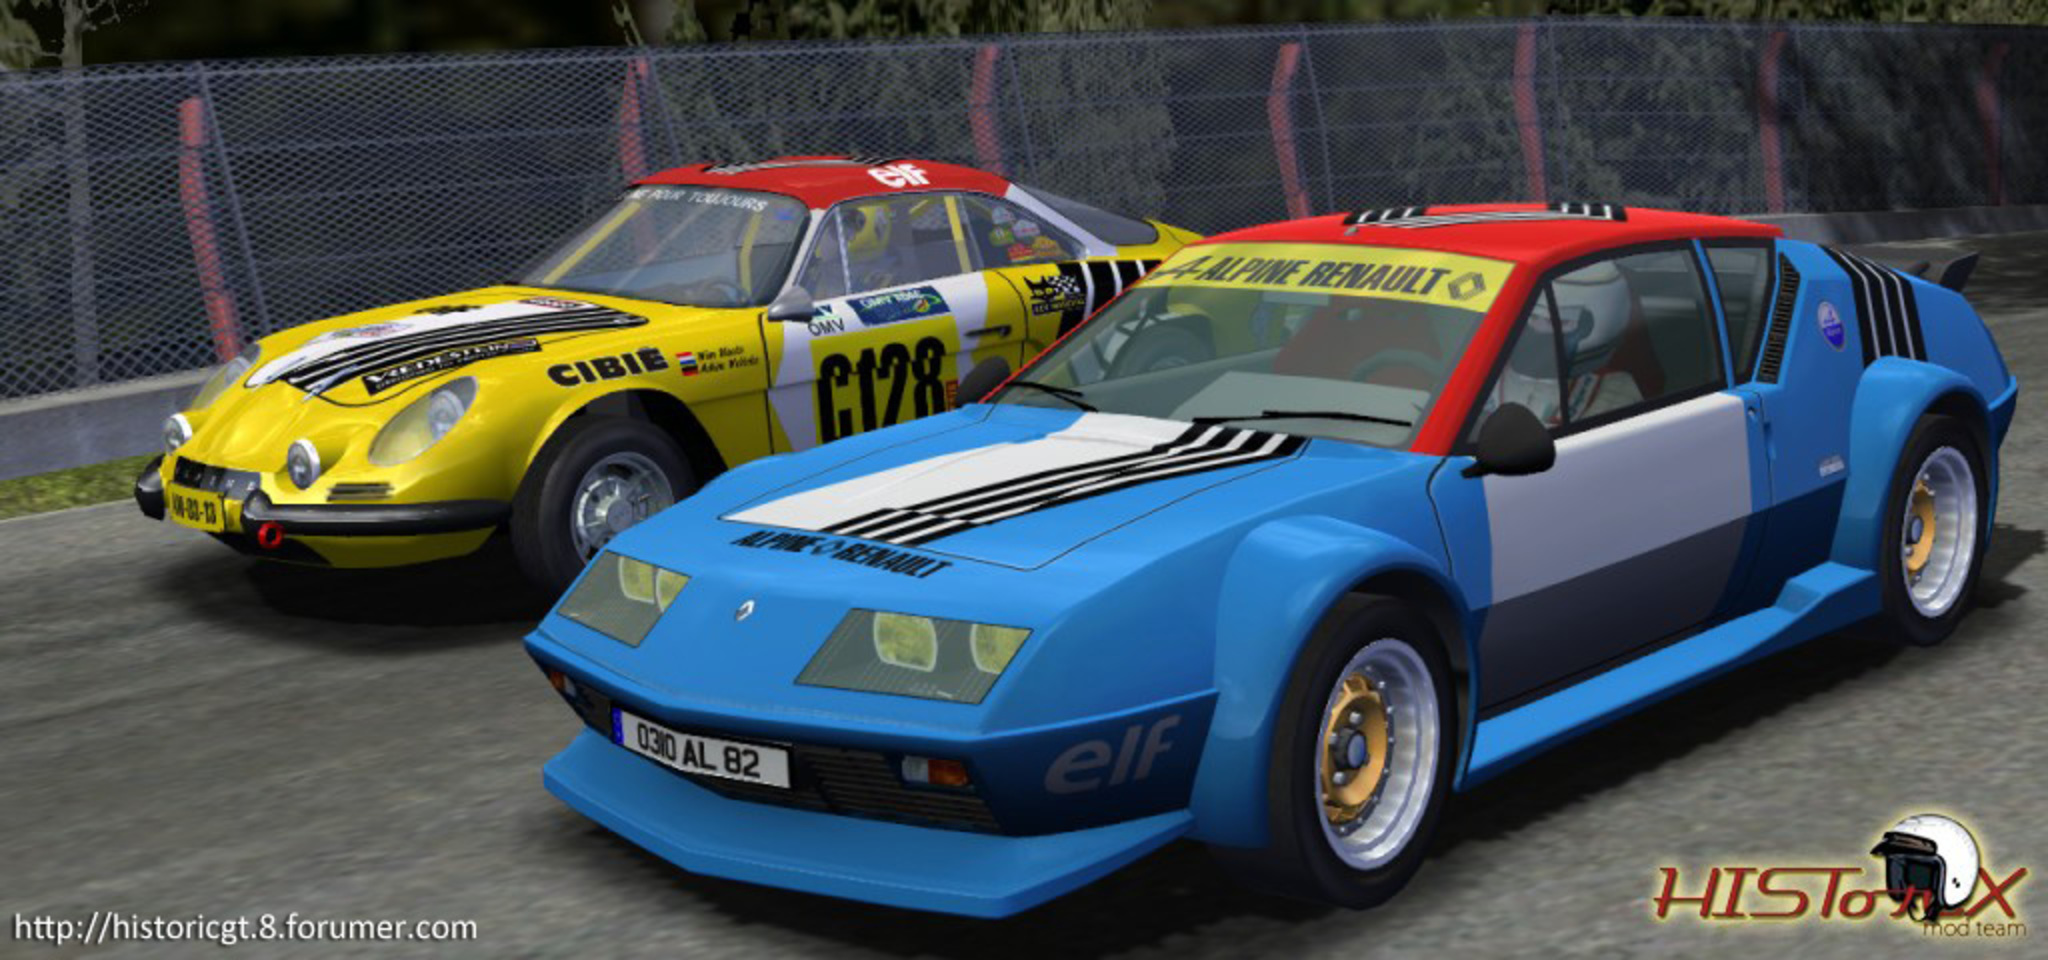 Introducing the Renault Alpine A310 in General information Forum